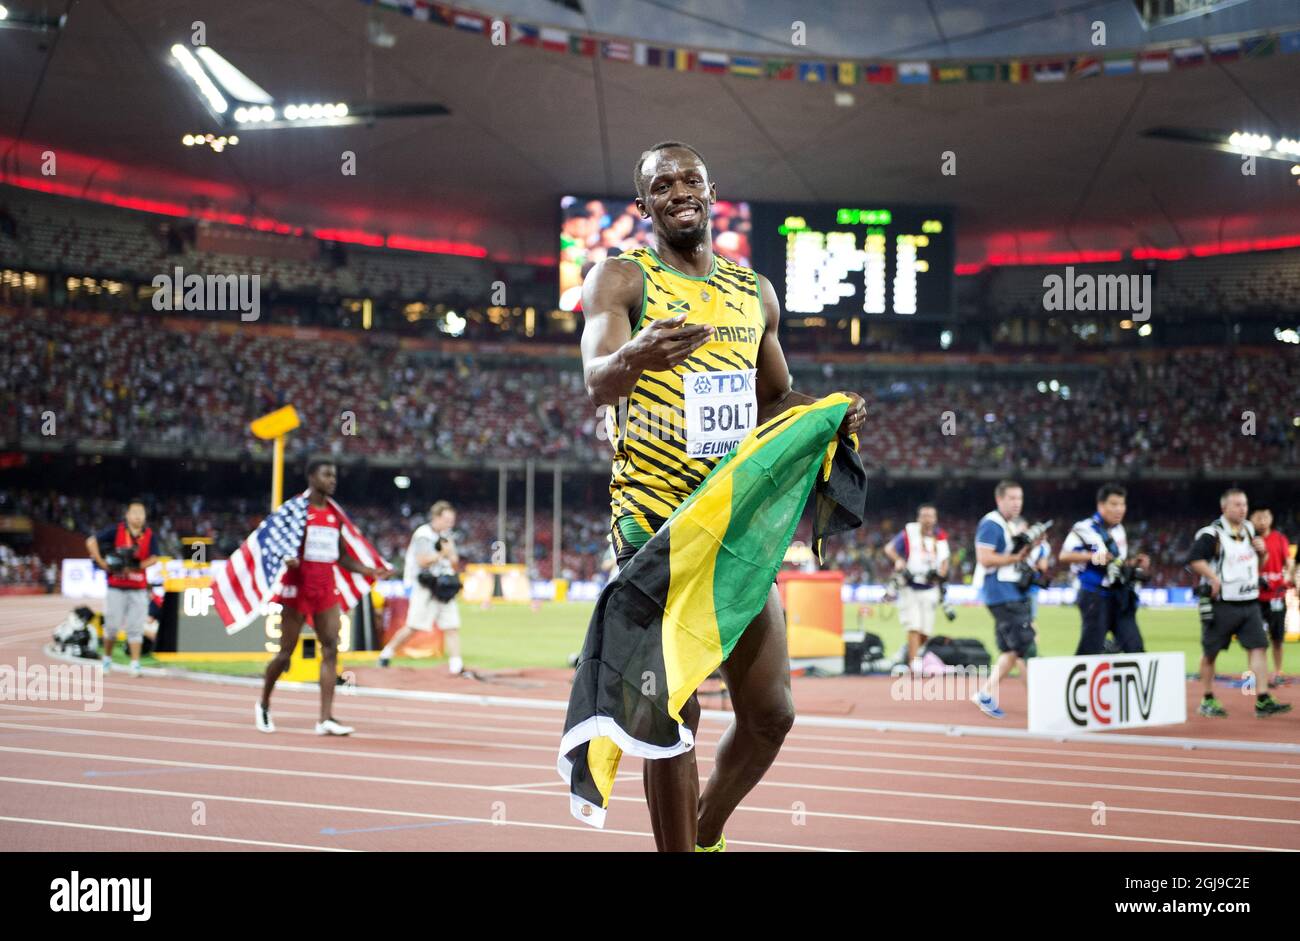 BEIJING 20150823 Usain Bolt of Jamaica after winning the men's 100m final during the Beijing 2015 IAAF World Championships at the National Stadium in Beijing, China, August 23, 2015. Photo: Jessica Gow / TT / Kod 10070  Stock Photo